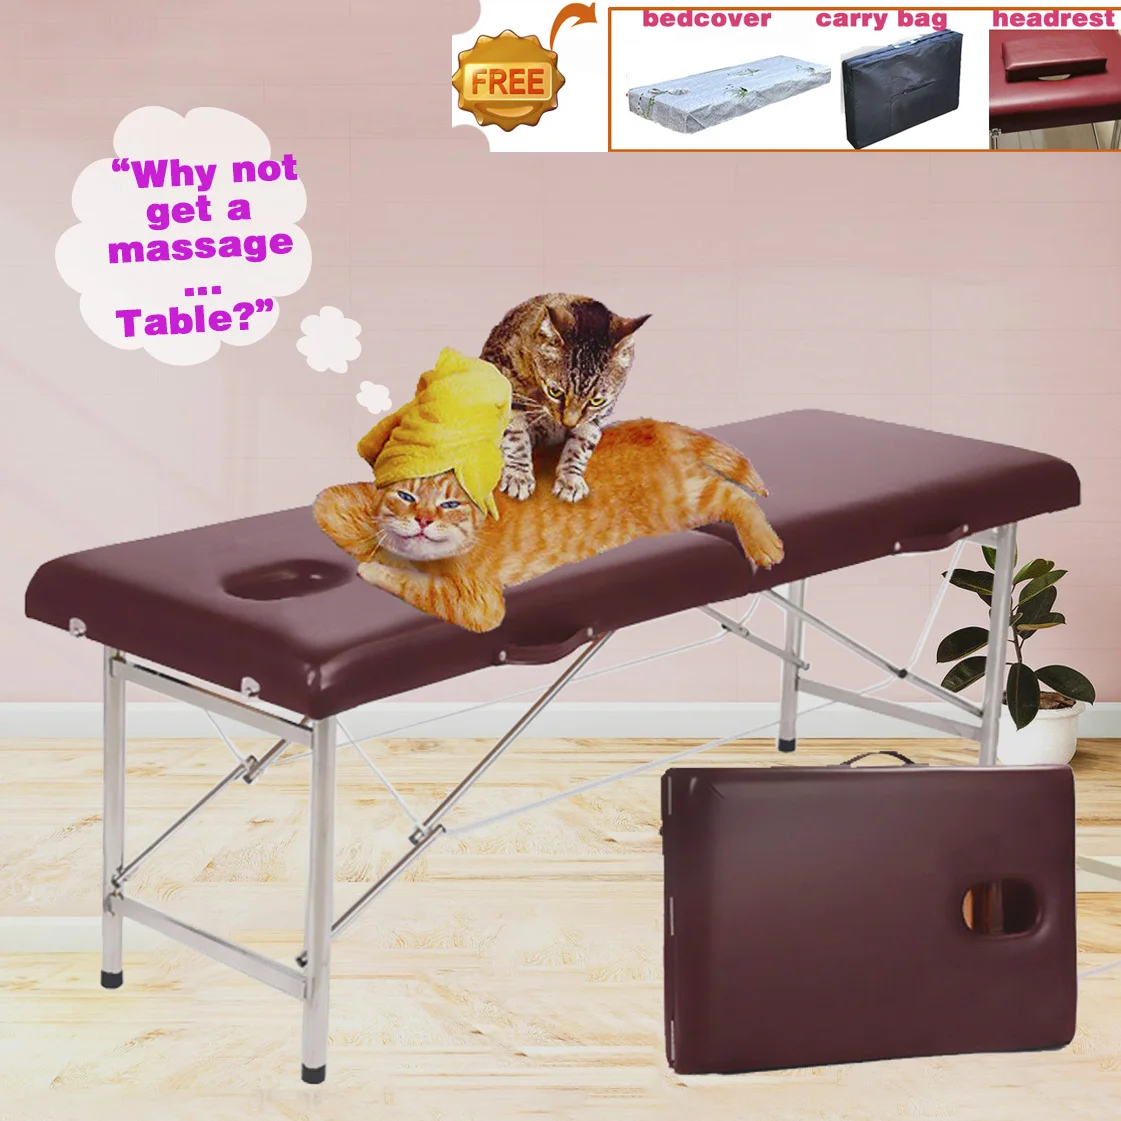 

Portable Massage Table Professional Folding Aesthetic Spa Tattoo Stretchers Couch Beauty Salon Foldable Massage Bed Esthetique